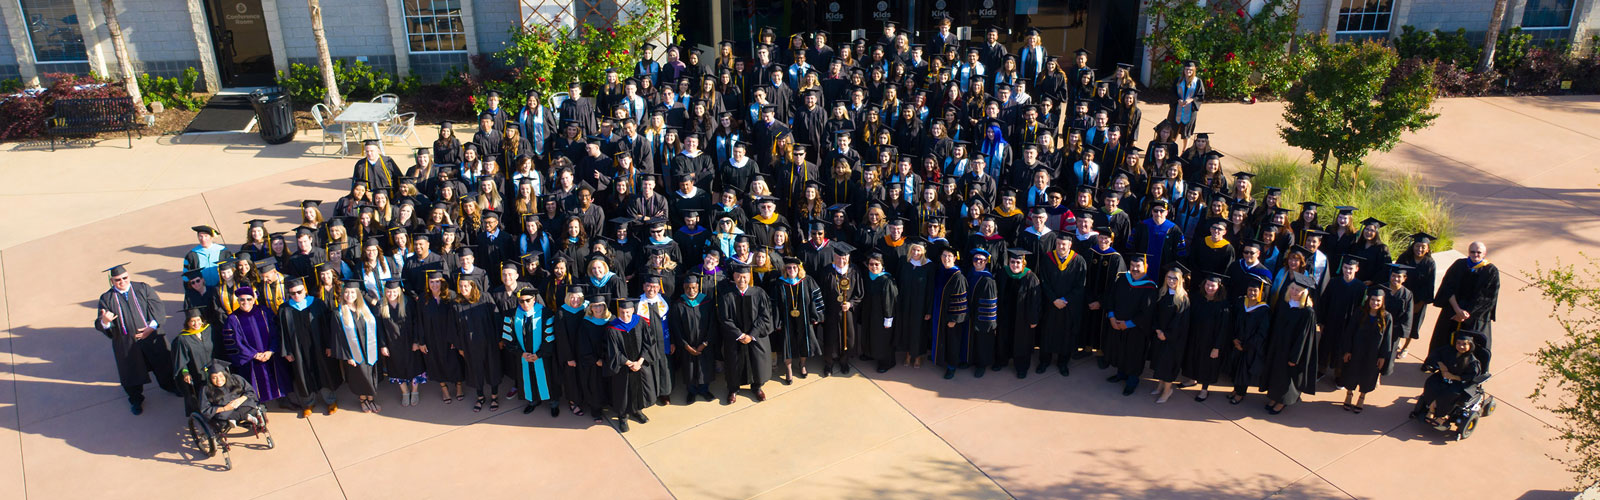 Large group photo of students and staff at Graduation